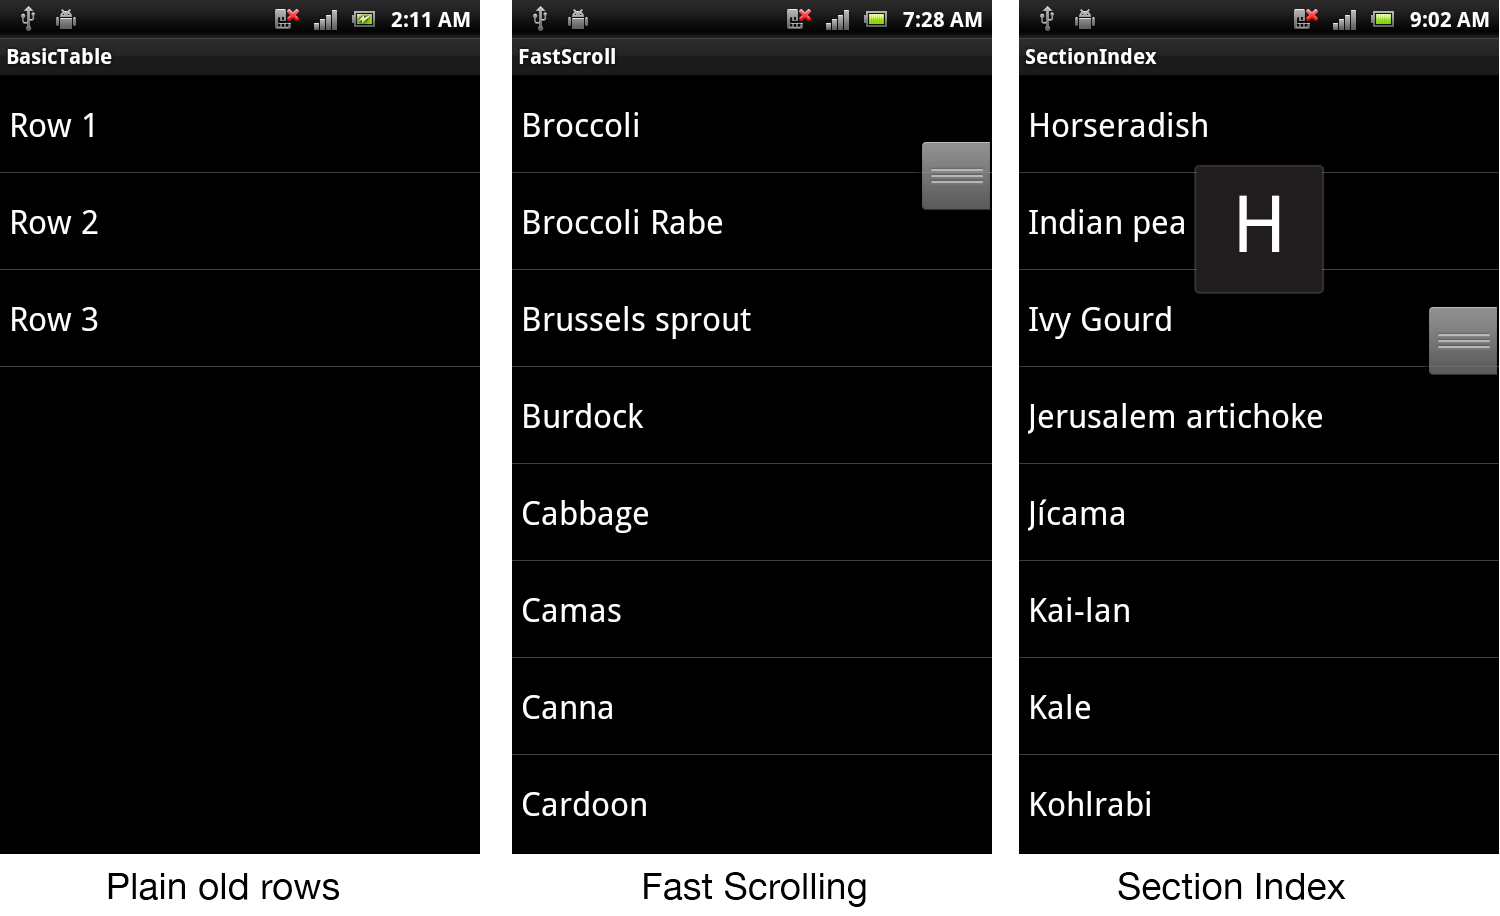 Screenshots of apps using Plain old rows, fast scrolling, and section index